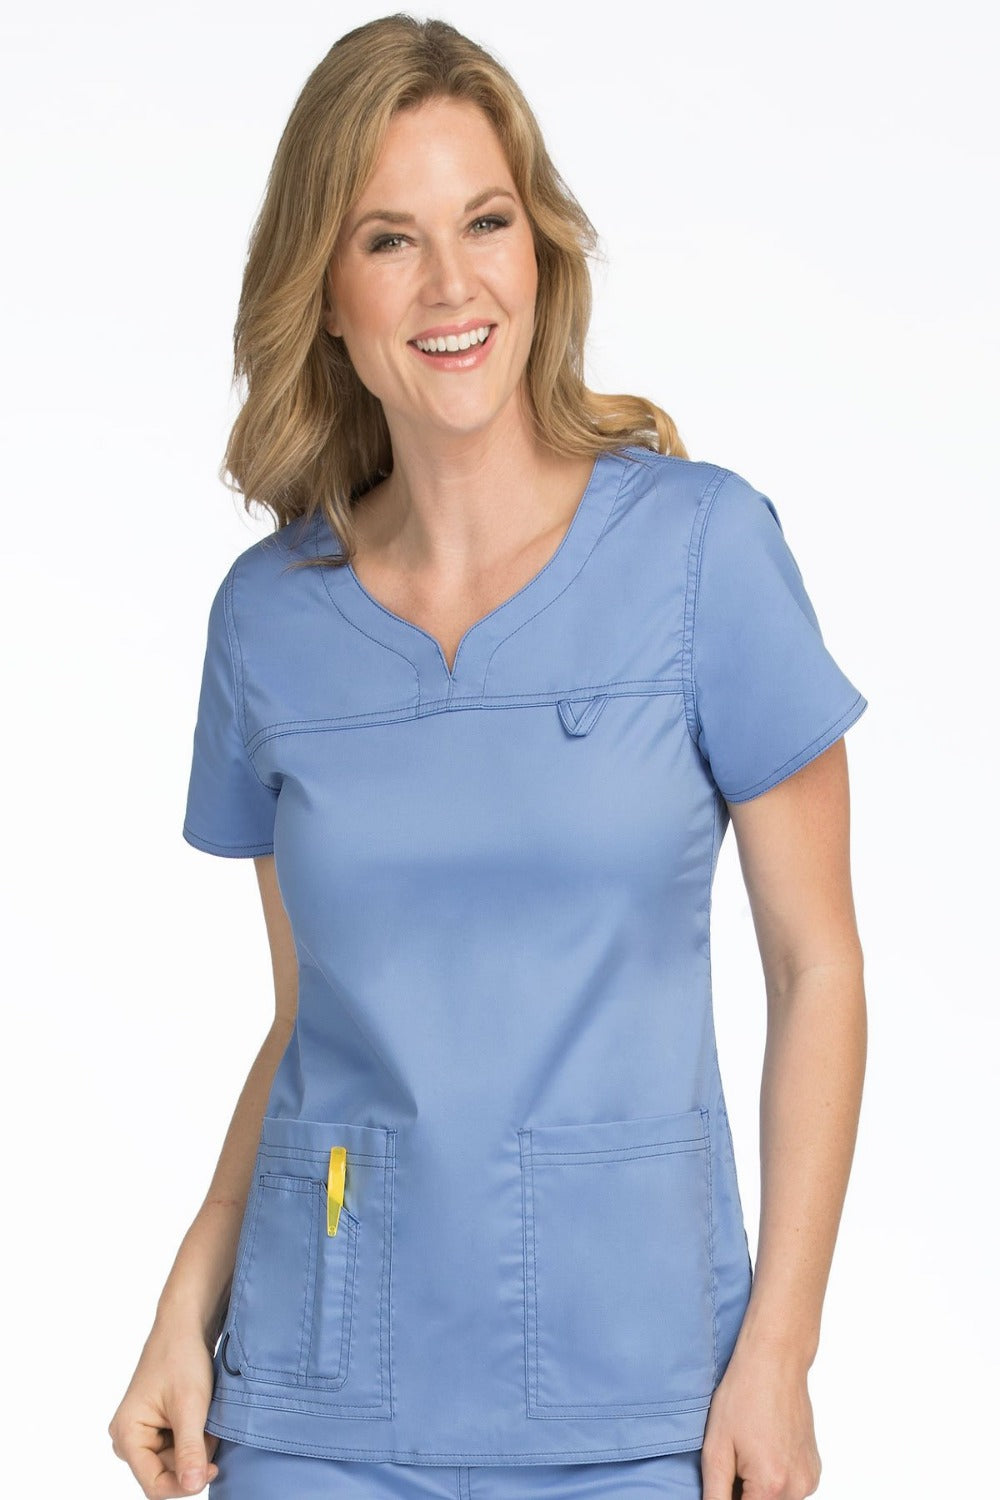 Med Couture Scrub Top MC2 Lexi in Ceil at Parker's Clothing and Shoes